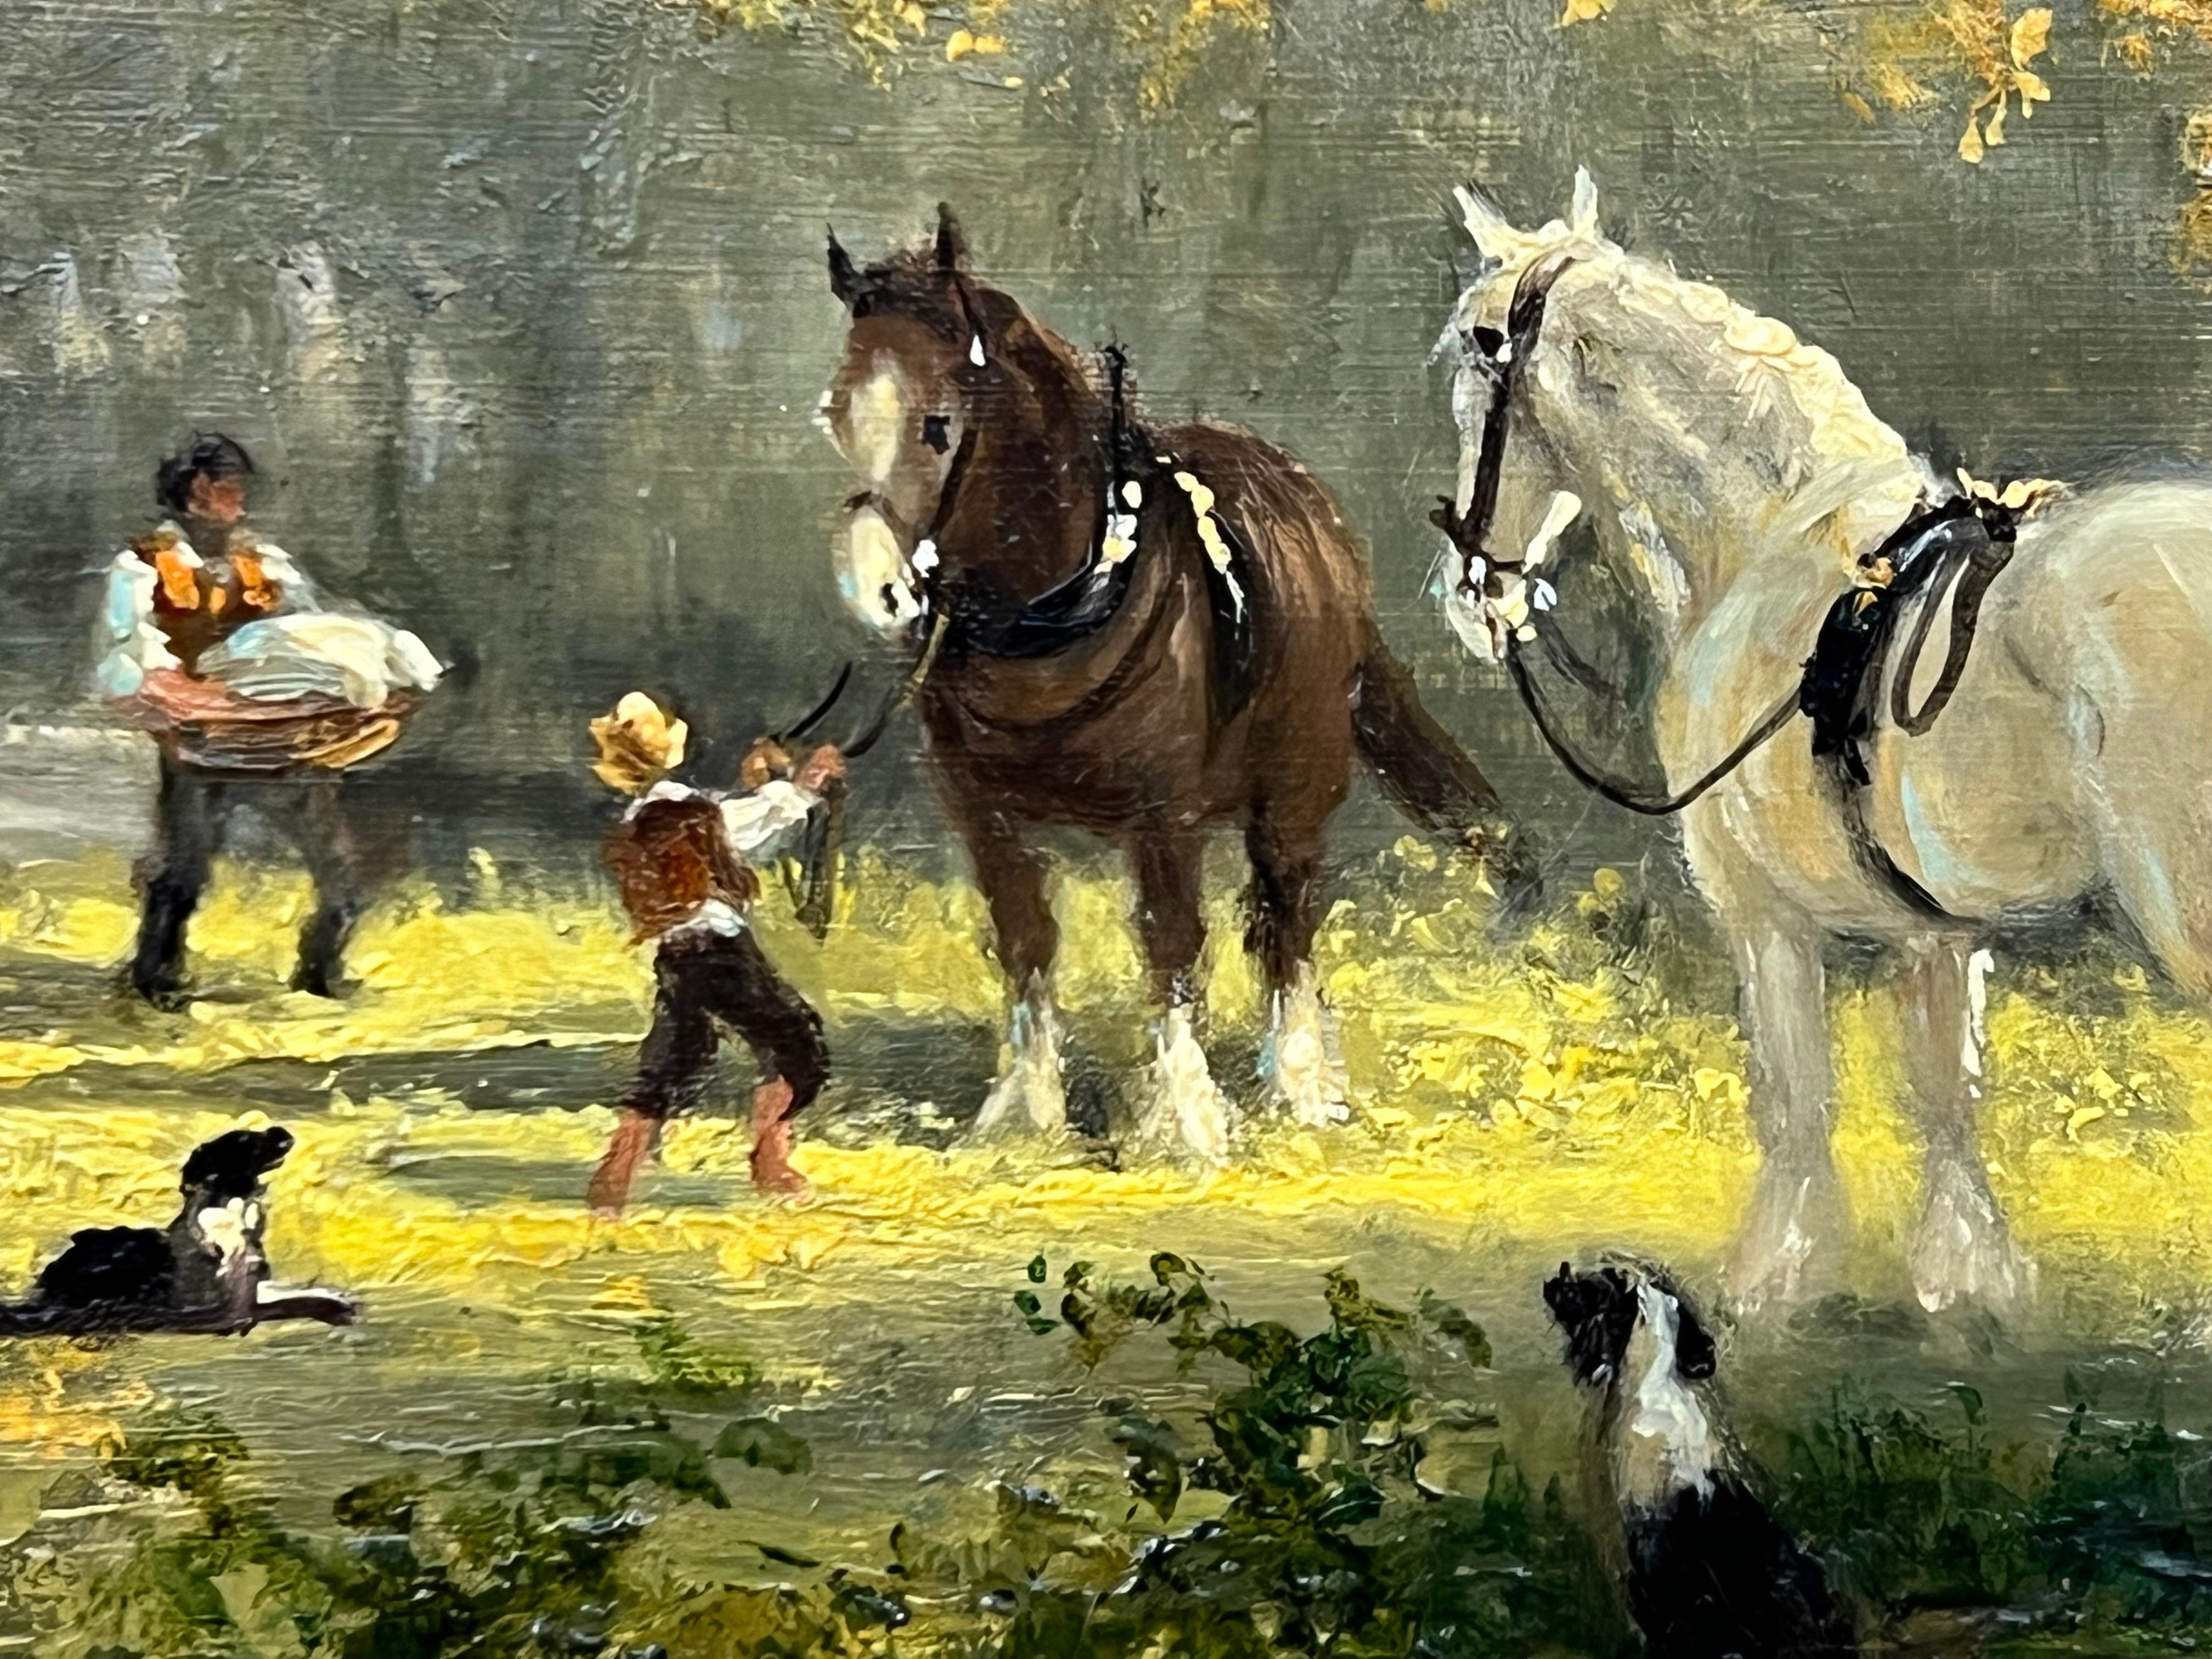 Idyllic Countryside Scene with River Boat, Horses, Figures & Dogs in Sunshine For Sale 1